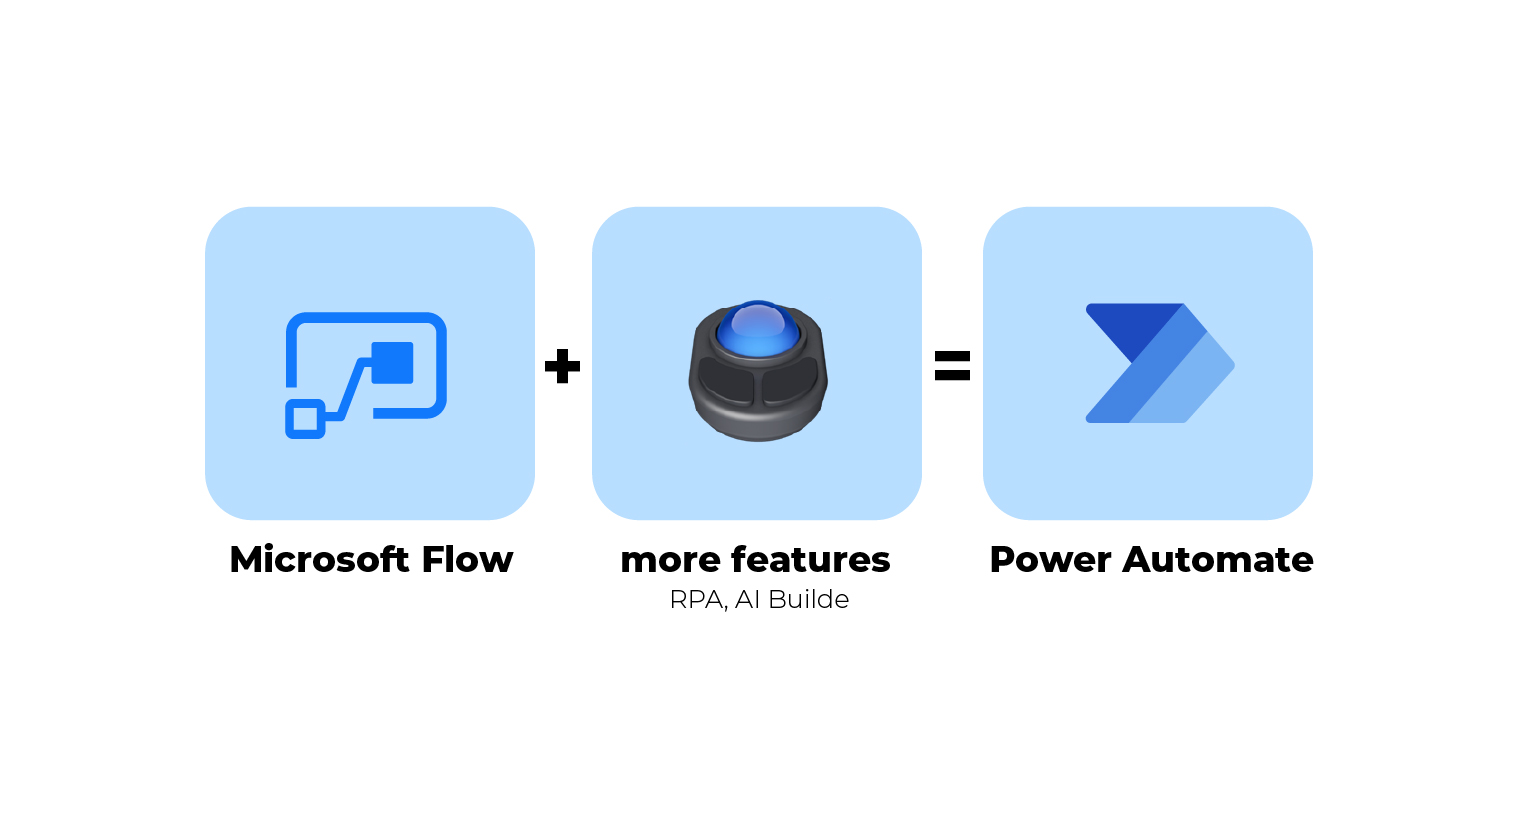 Difference between Microsoft Flow and Power Automate